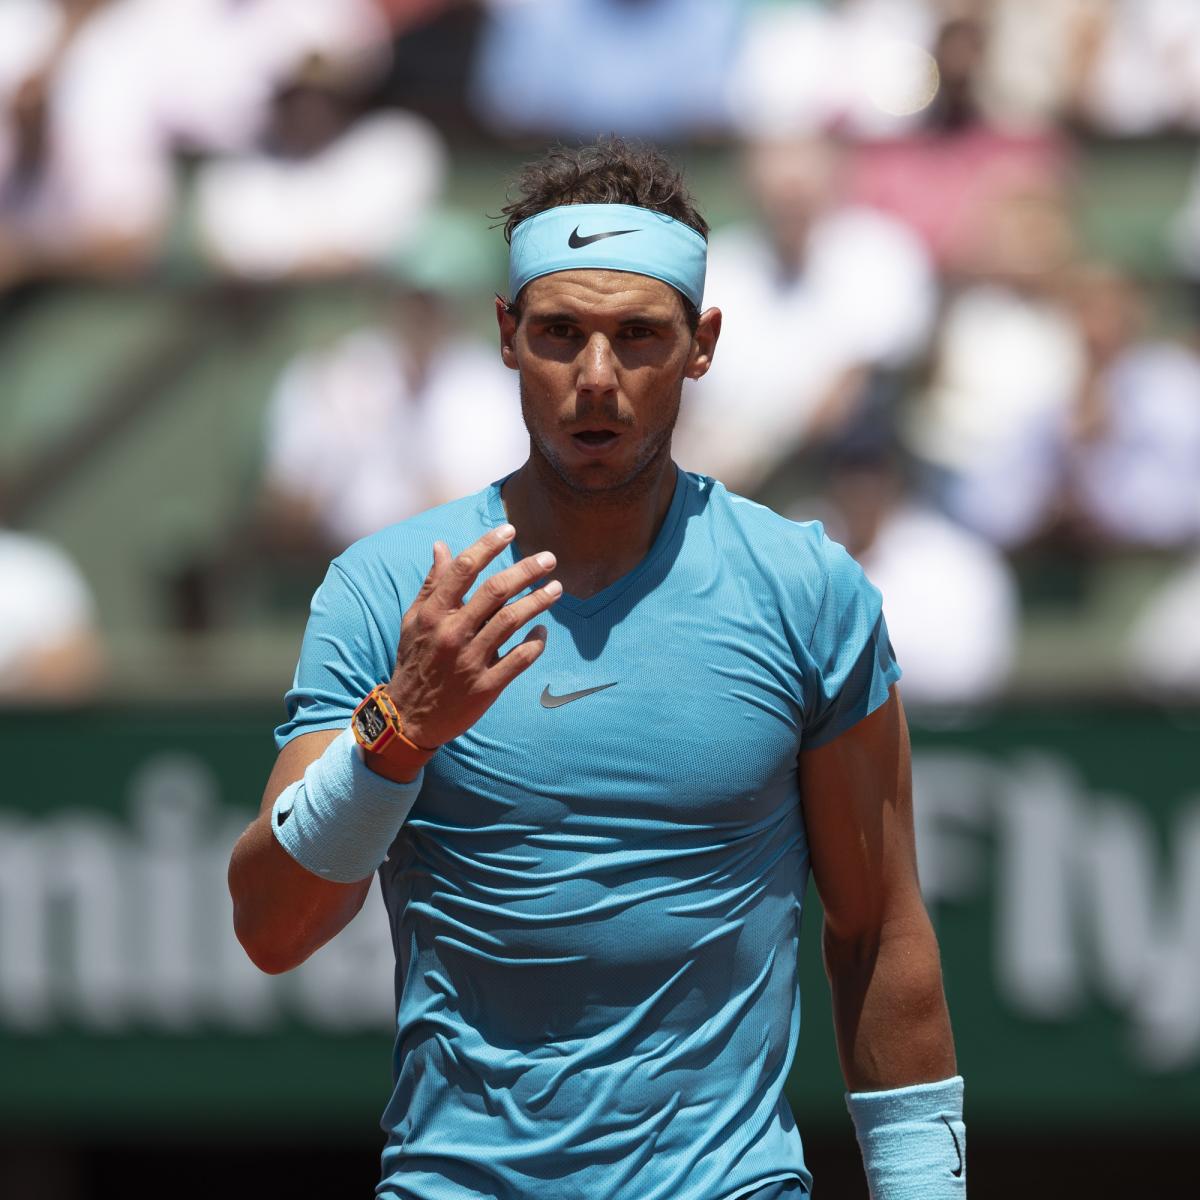 French Open 2018 Results: Thursday Winners, Scores, Stats, Singles Draw ...